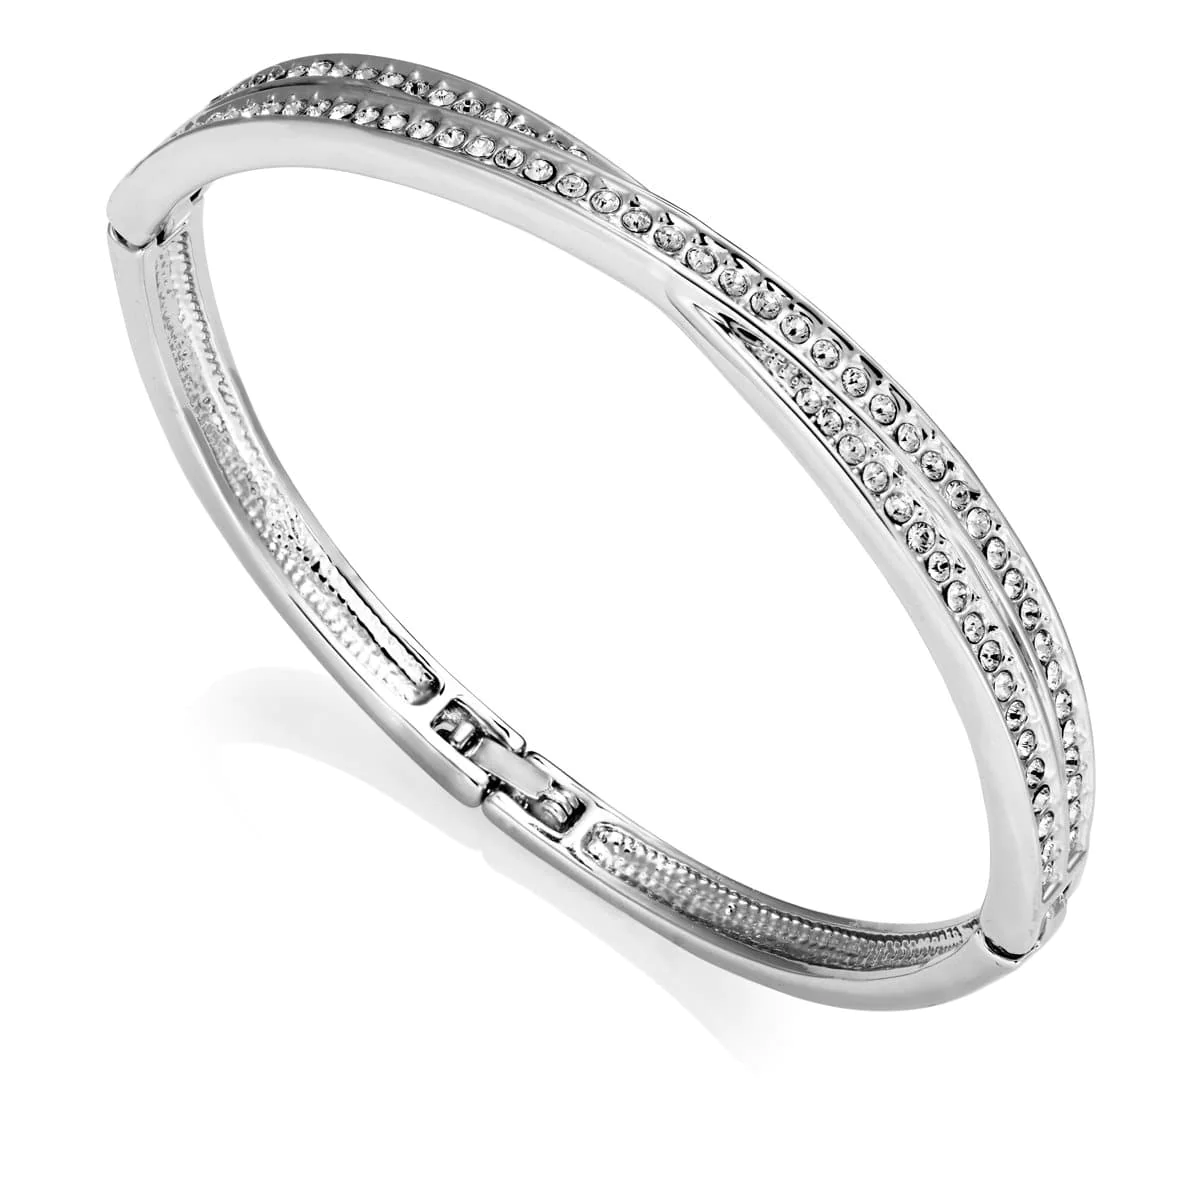 Silver Crossover Bangle Created with Swarovski® Crystals by Philip ...